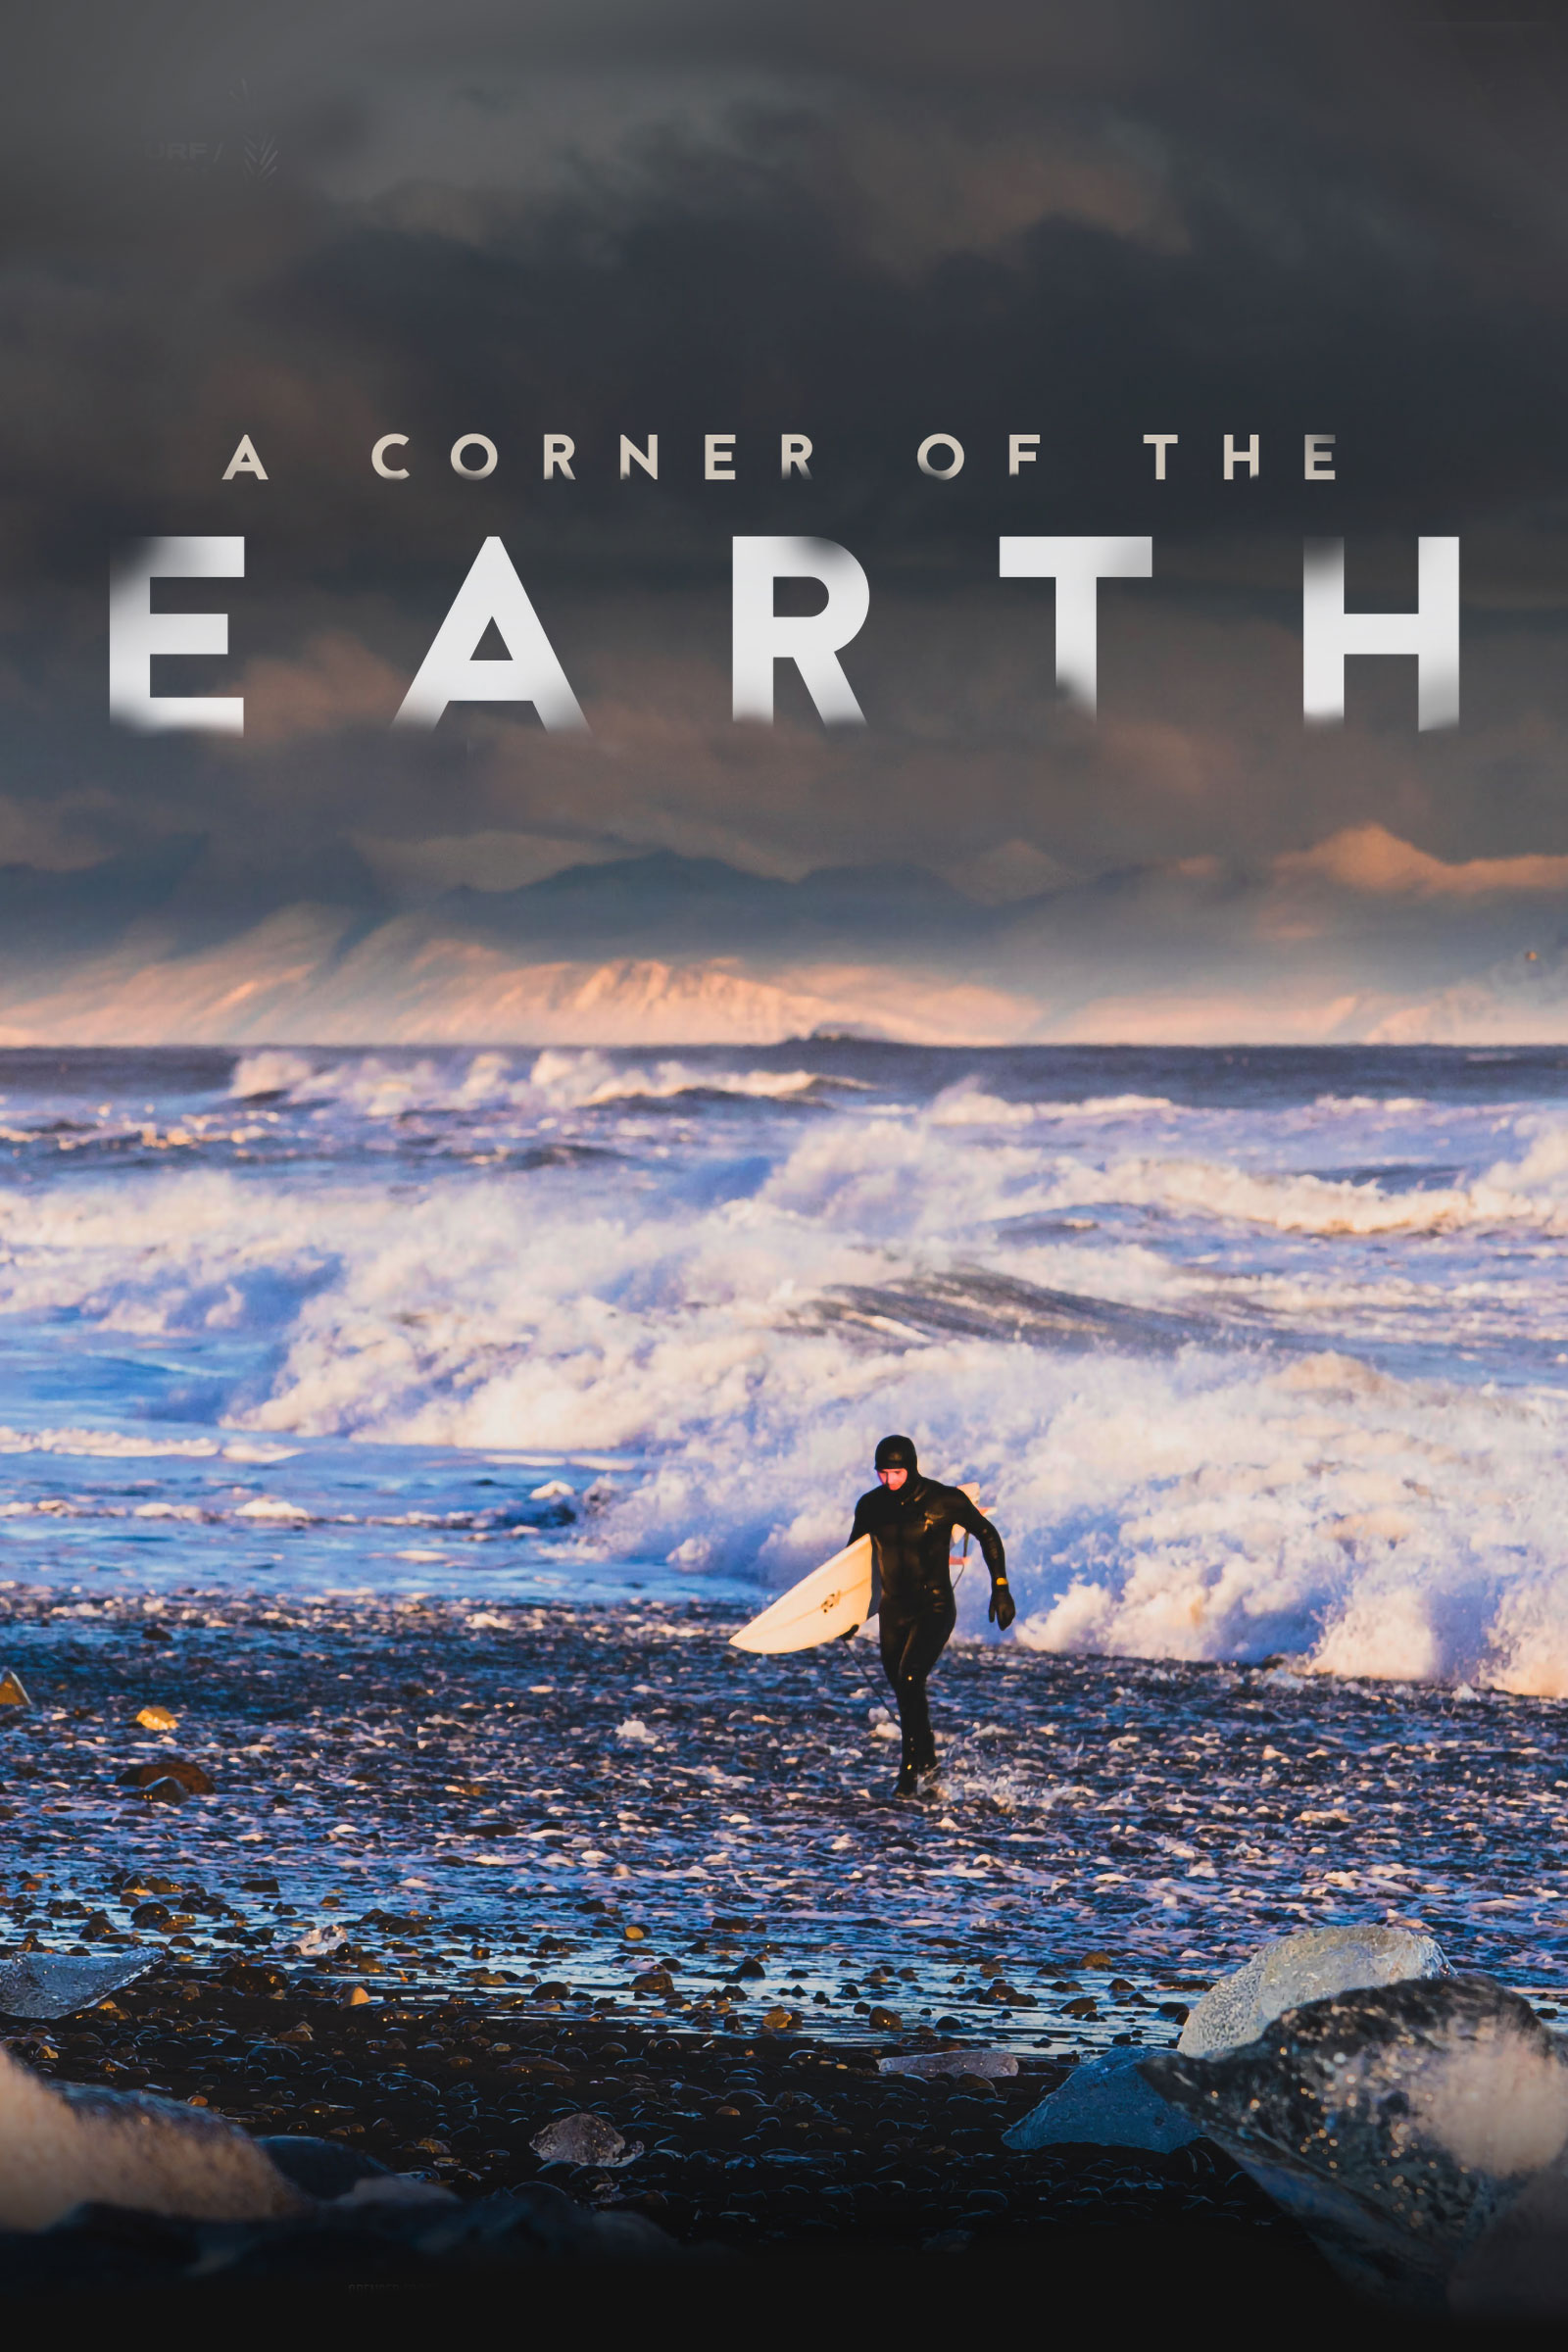 Where to stream A CORNER OF THE EARTH